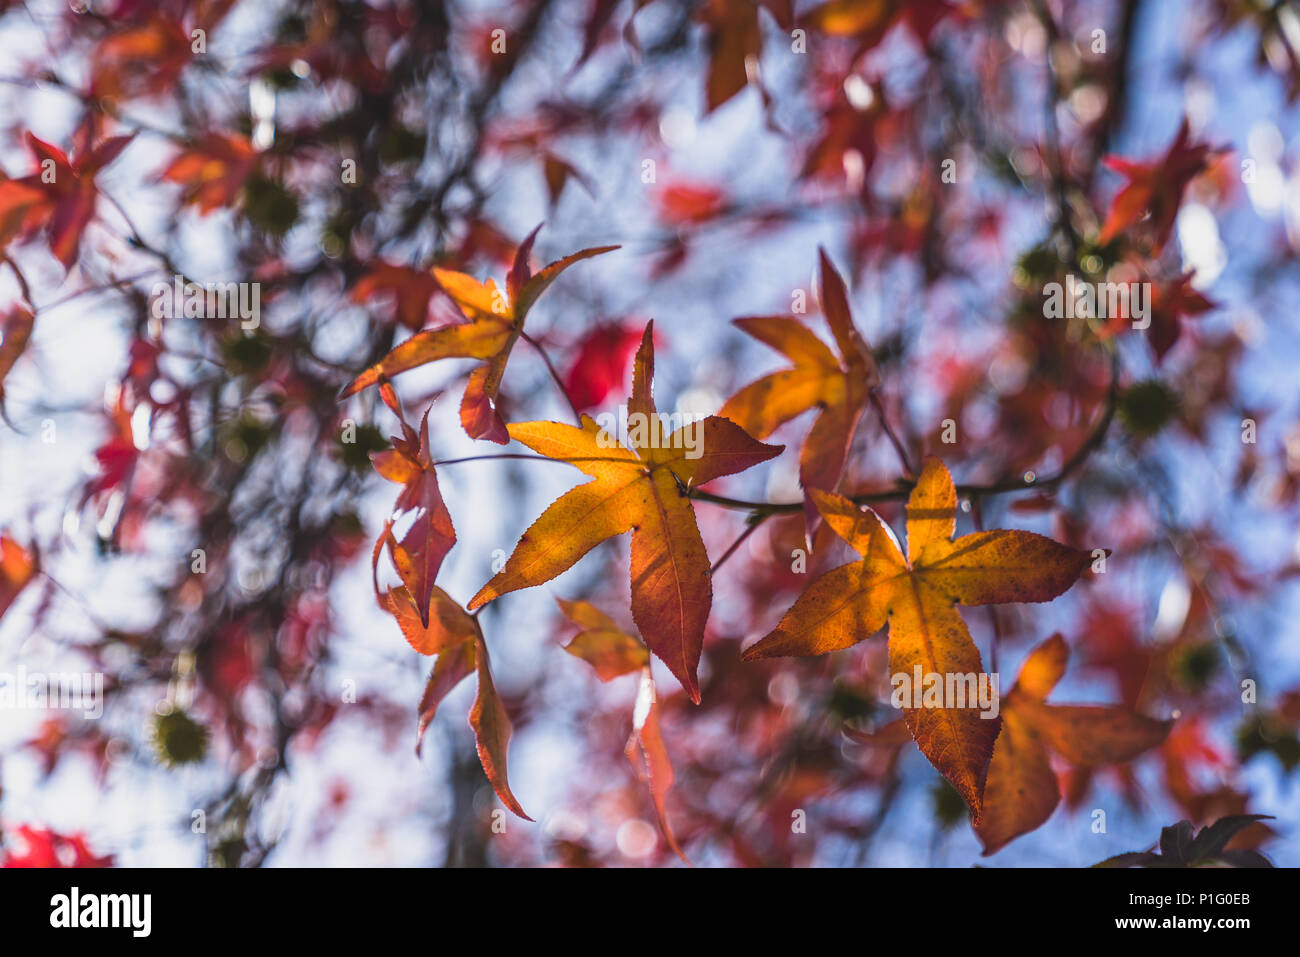 closeup of colorful fall leaves on trees Stock Photo